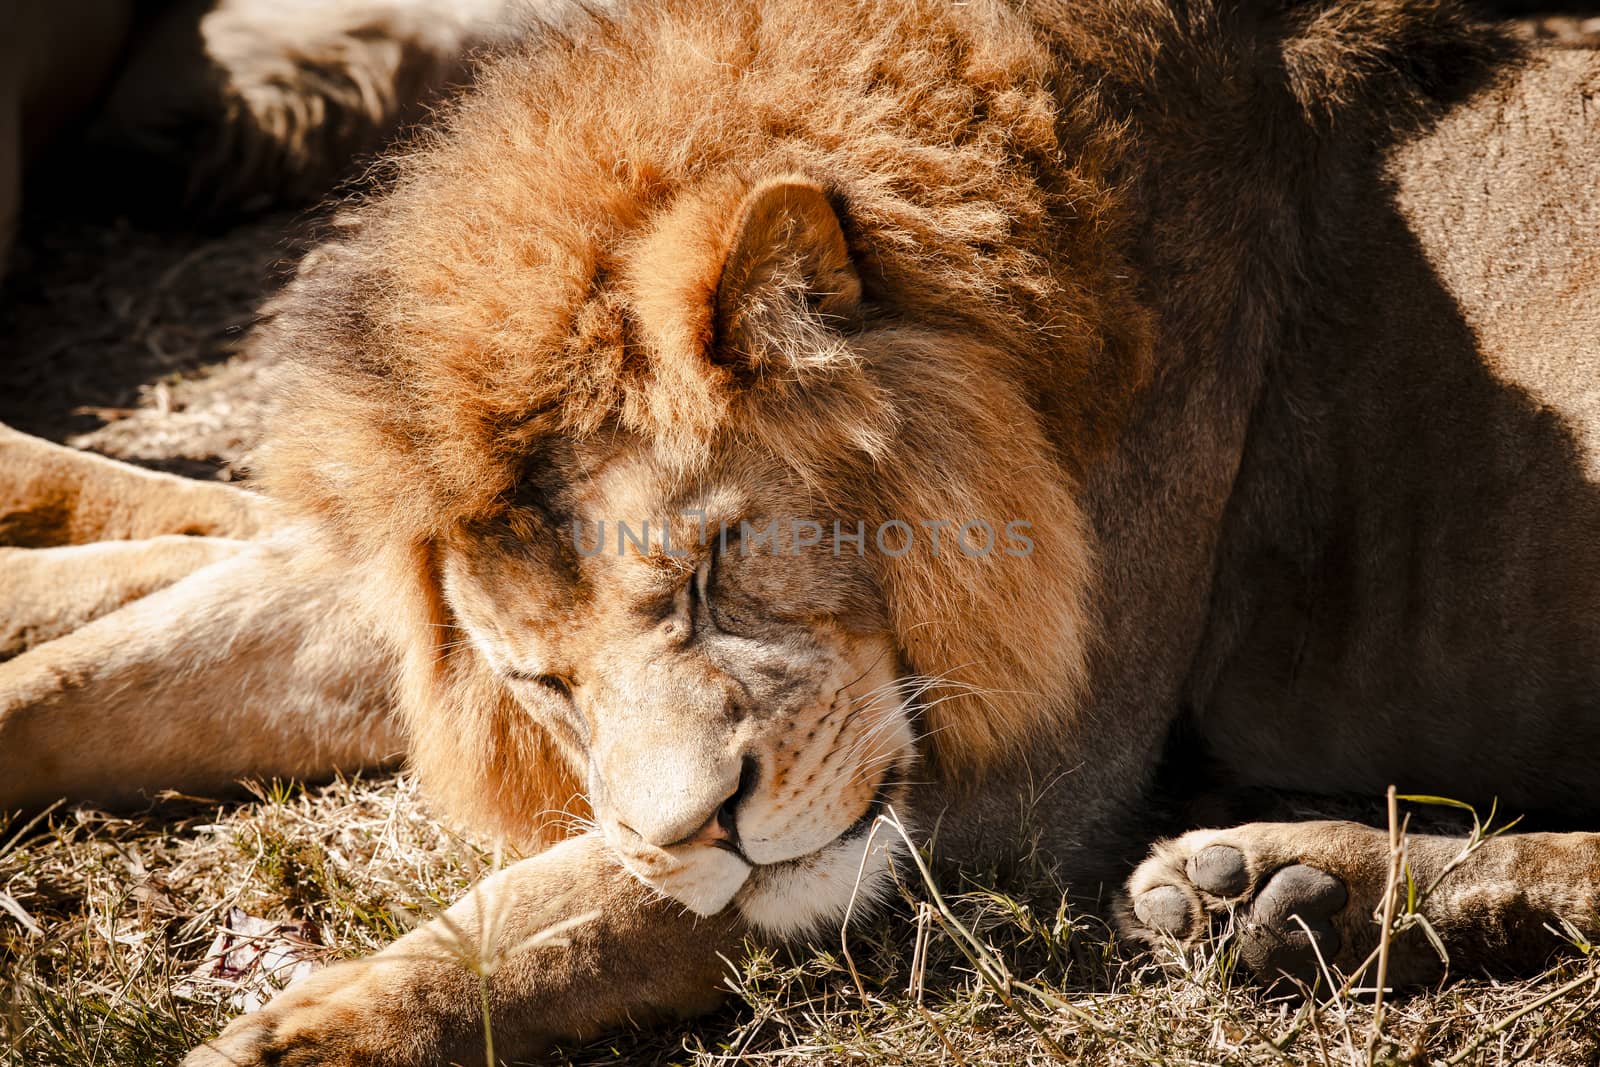 A male Lion sleeping in the sunshine by WittkePhotos